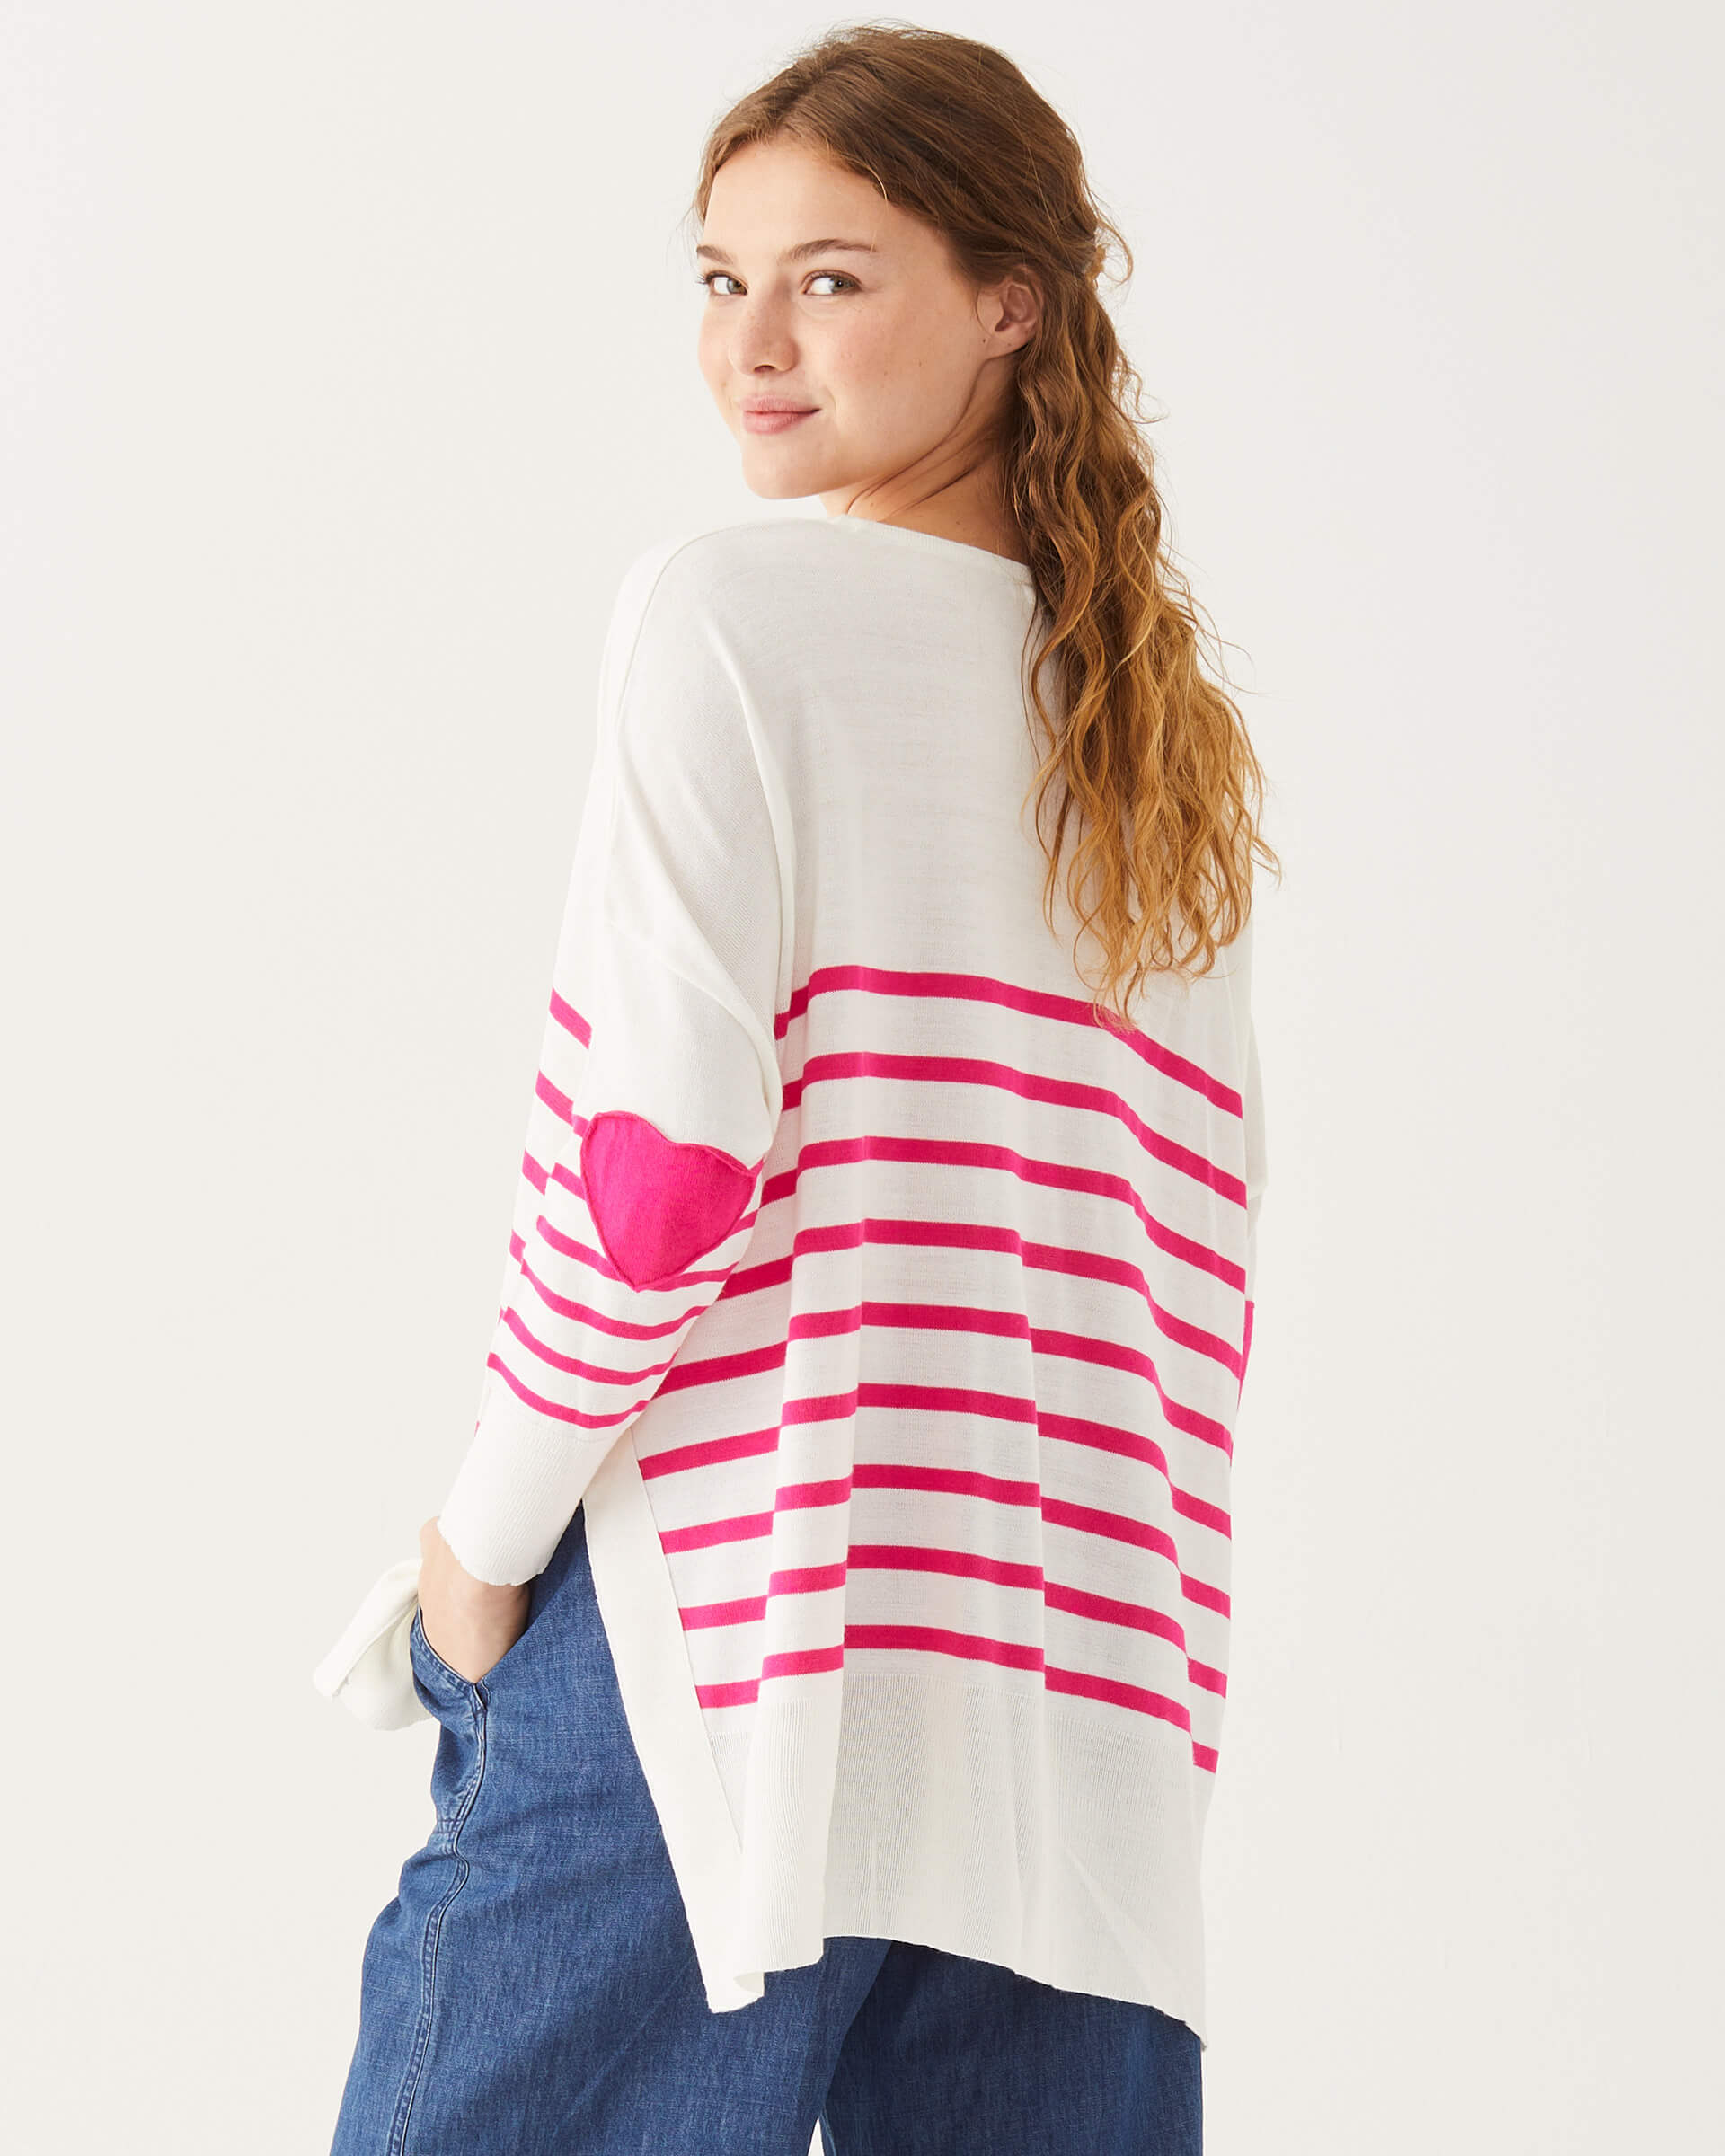 female wearing white and pink striped sweater with pink hearts on the elbow looking over shoulder